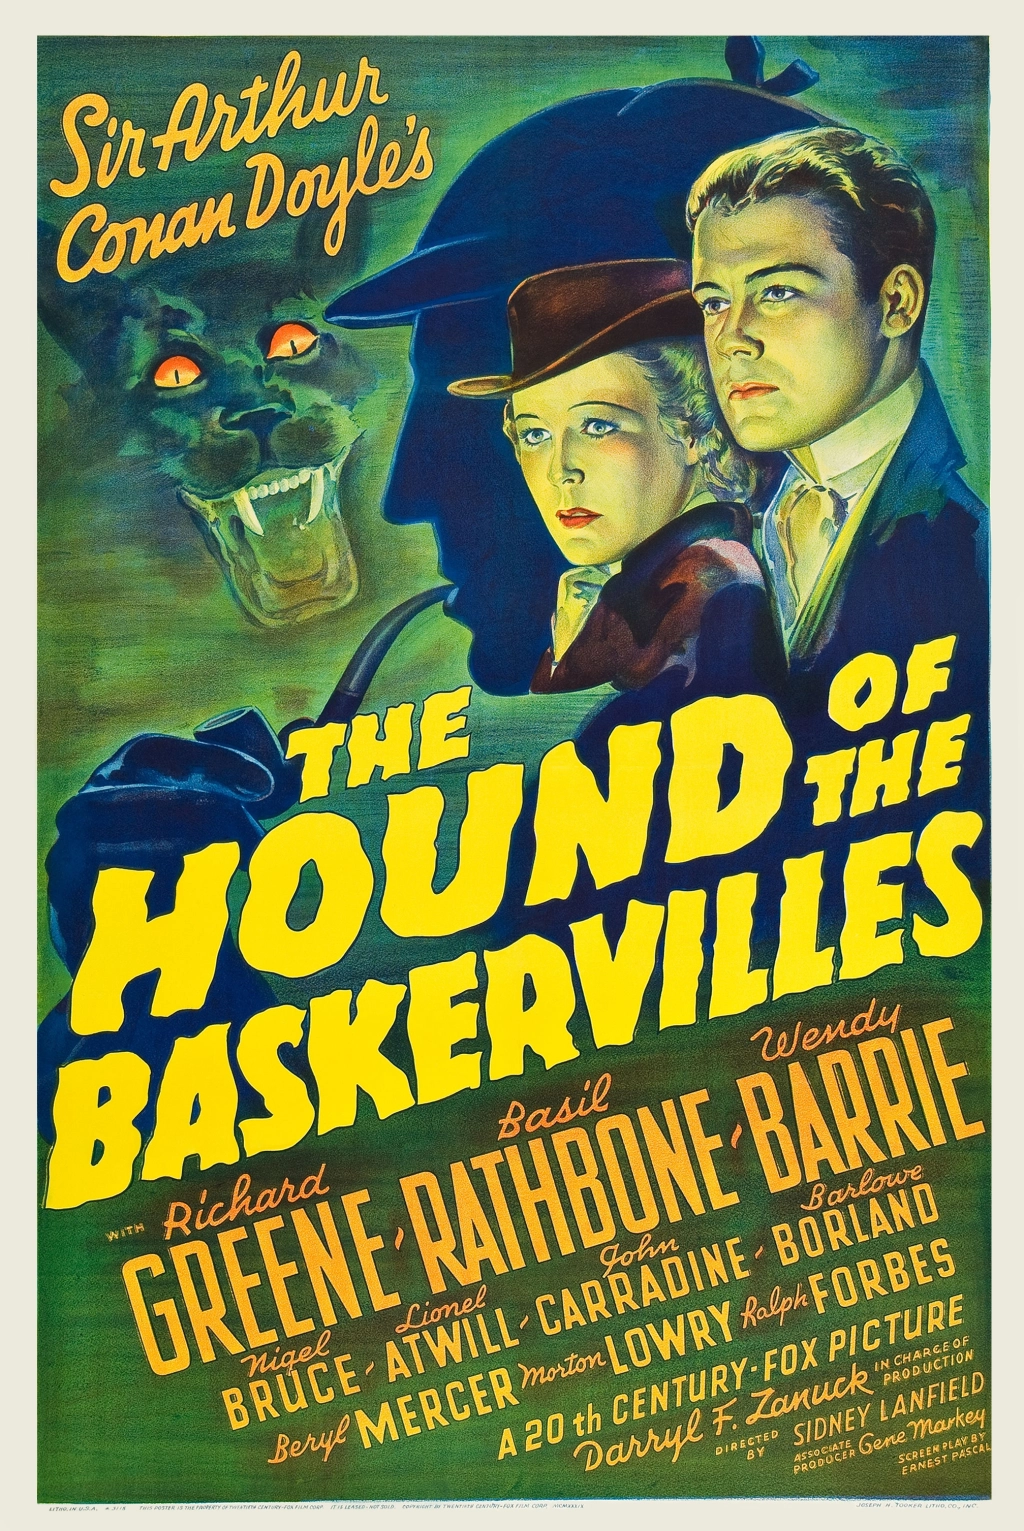 The Hound of the Baskervilles – 1939 (Holmes on Film)